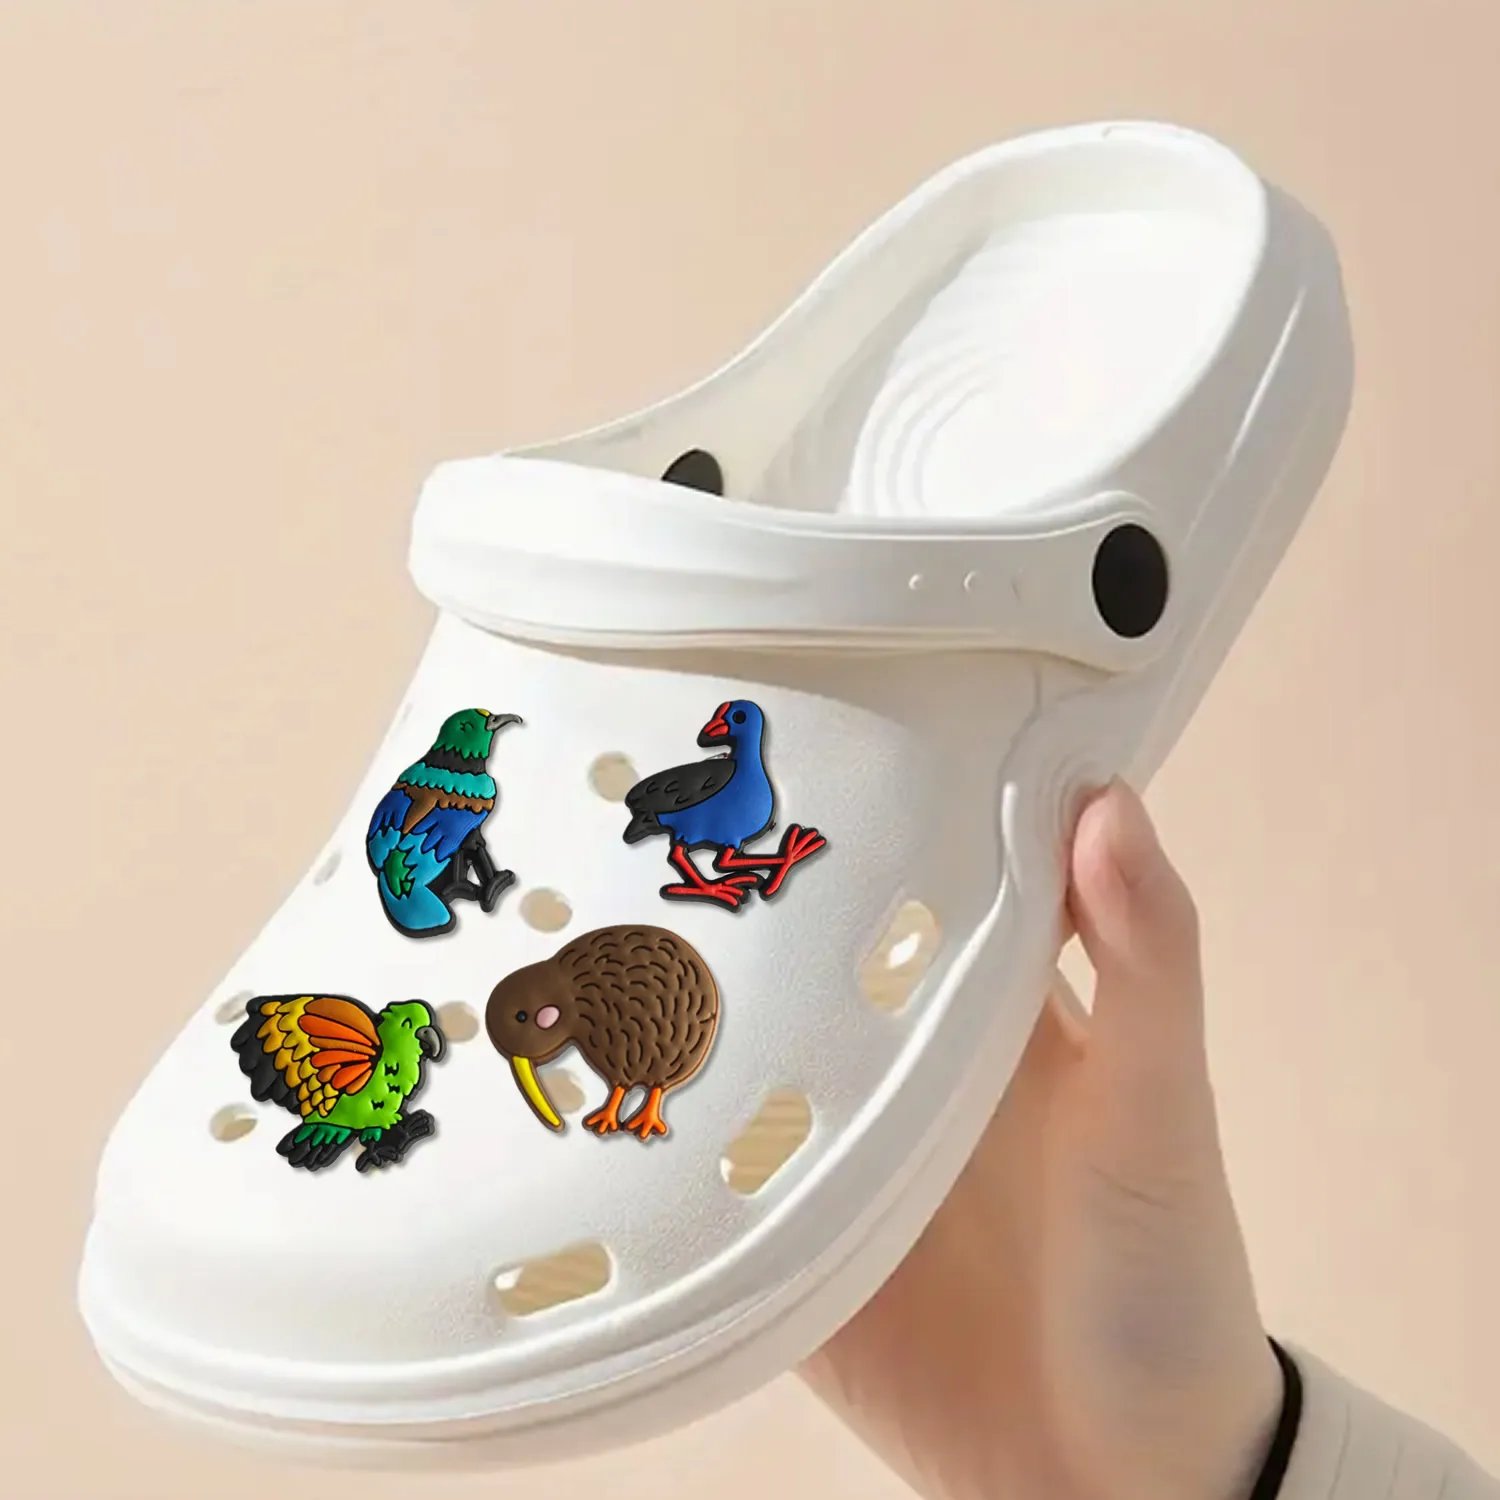 6pcs cartoon bird shoe charms set for clogs slides sandals cute funny designs durable pe material perfect holiday birthday gift